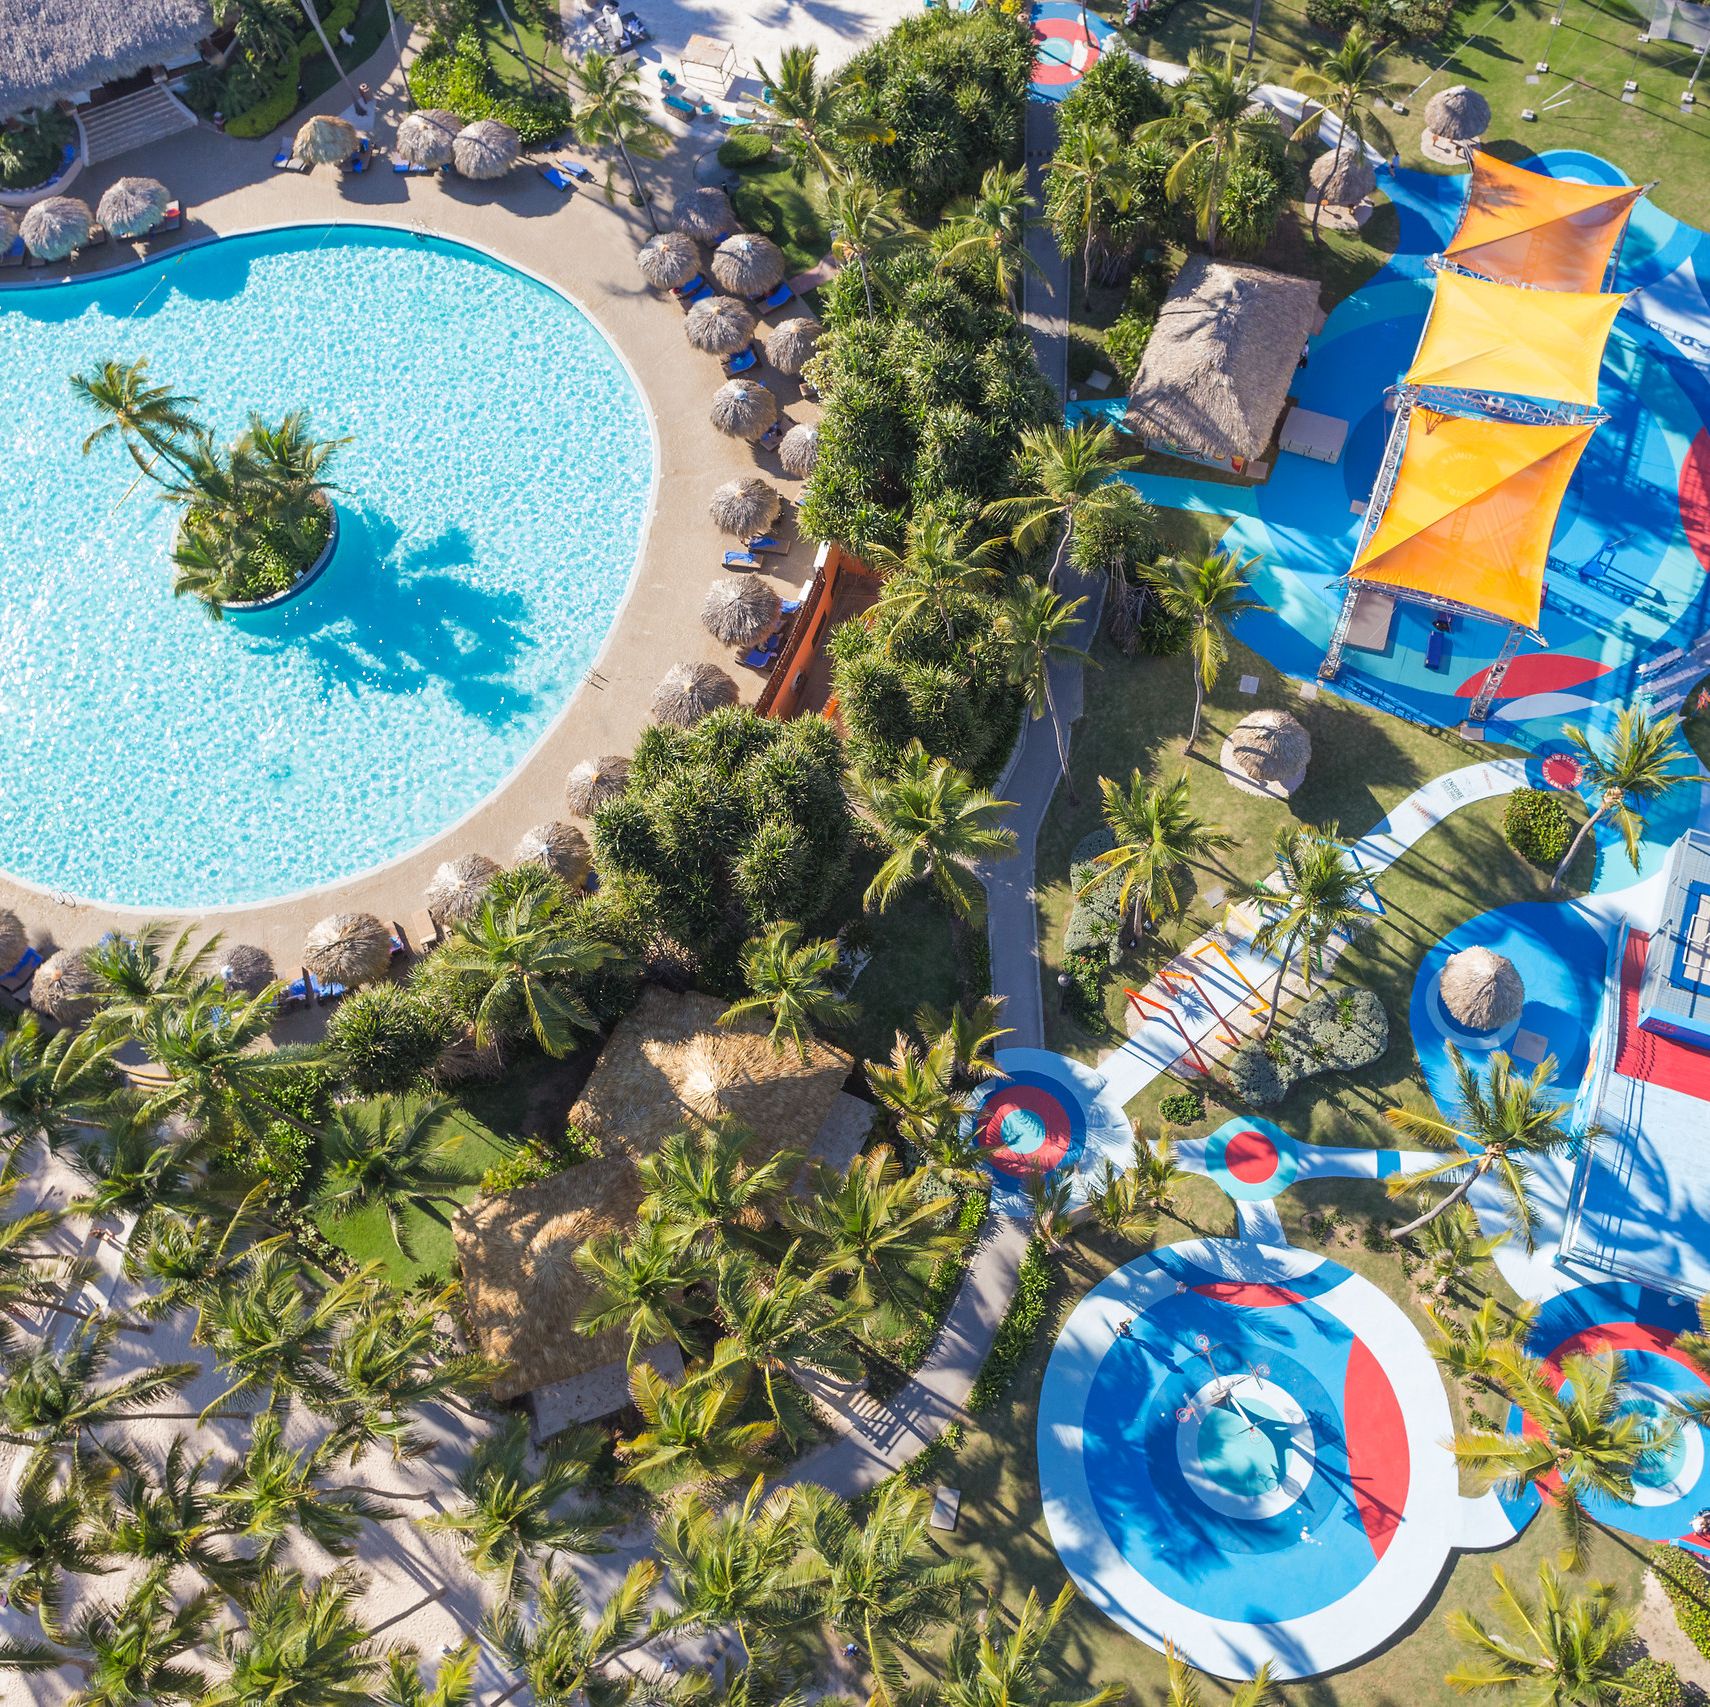 Why You Should Take the Family to an All-Inclusive Resort at Least Once